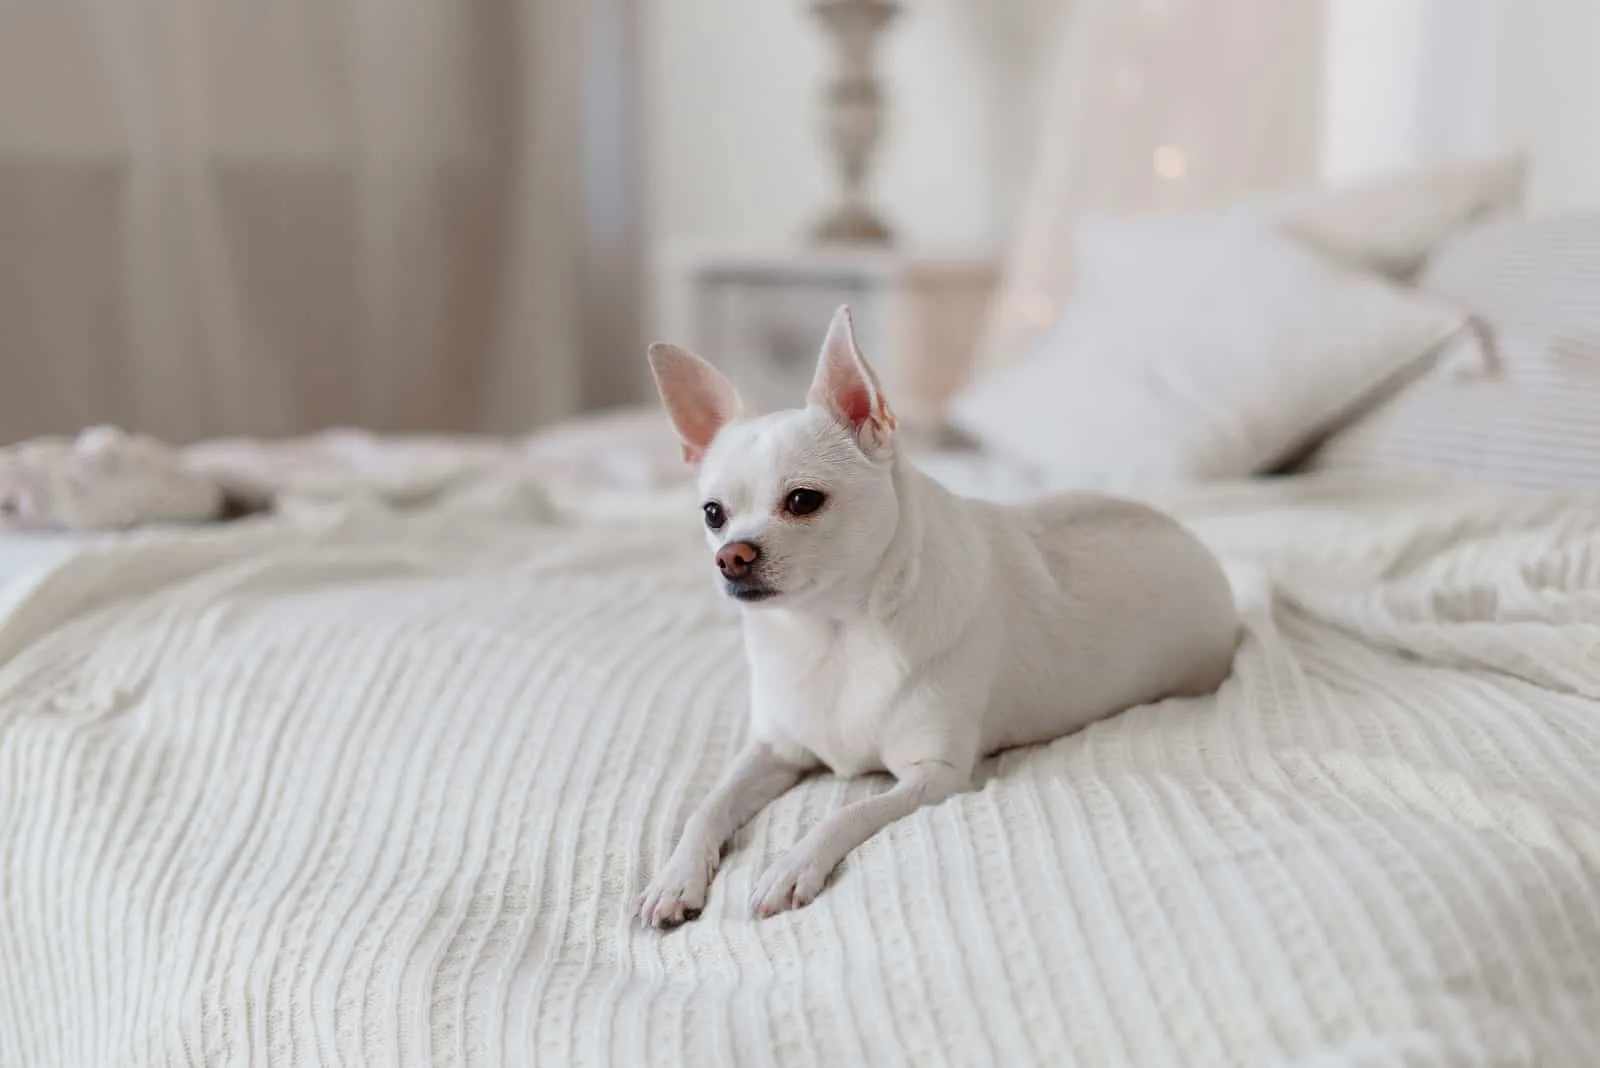 Small white cute Chihuahua dog resting on bed 